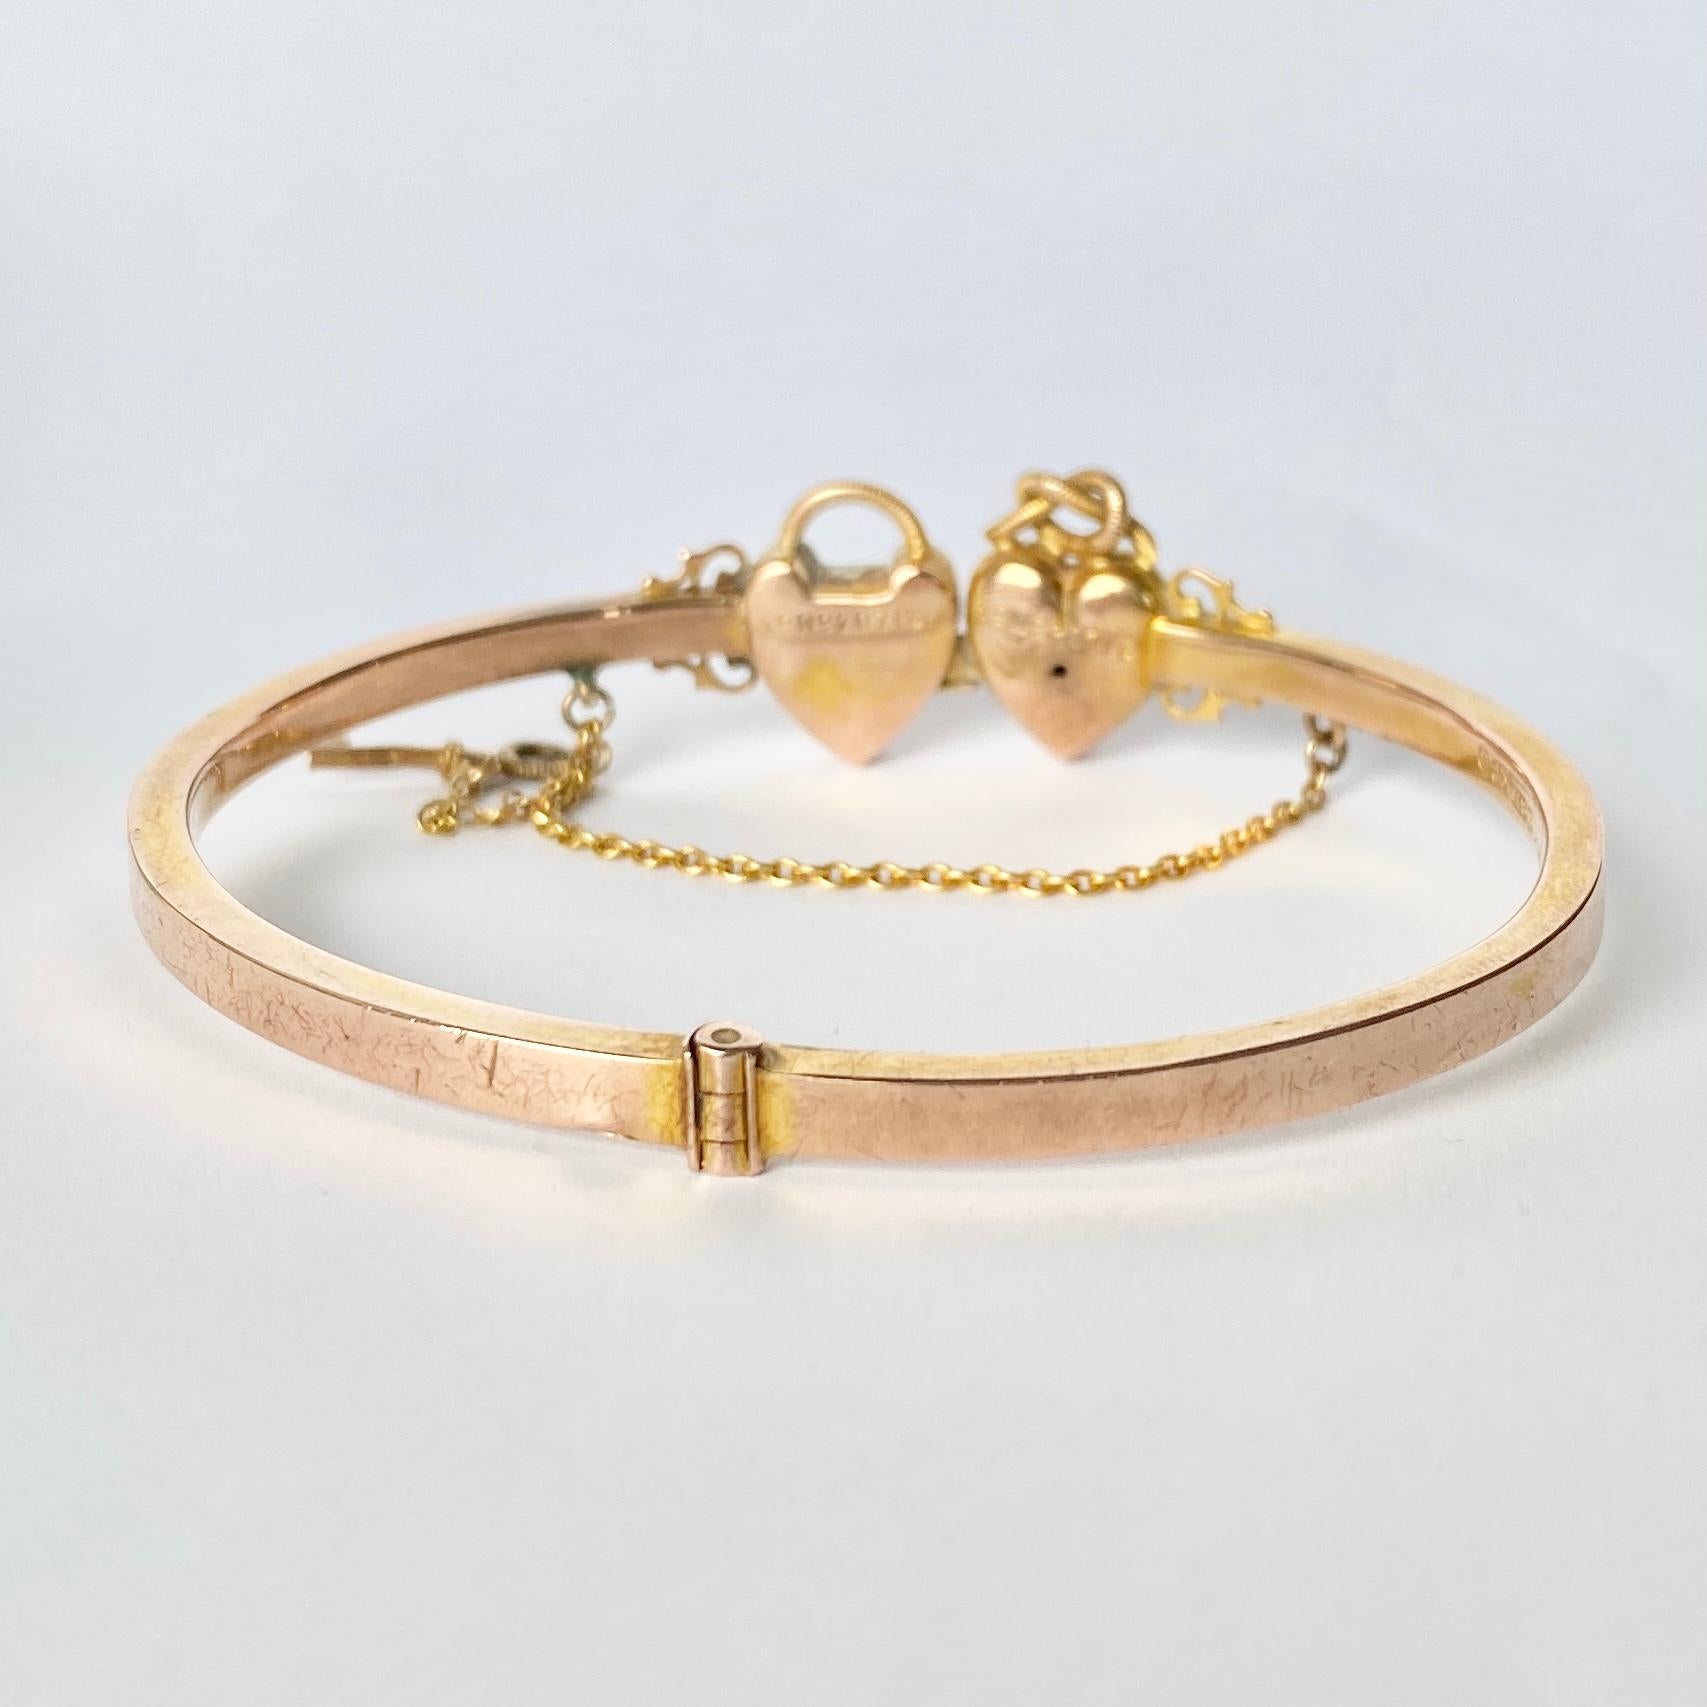 This gorgeous 9carat gold bangle has two hearts and a key. The gold is glossy and smooth and the fastening has a safety chain. The bangle opens by using the key. Fully hallmarked Birmingham 1892.

Inner diameter: 58mm 

Weight: 6.9g